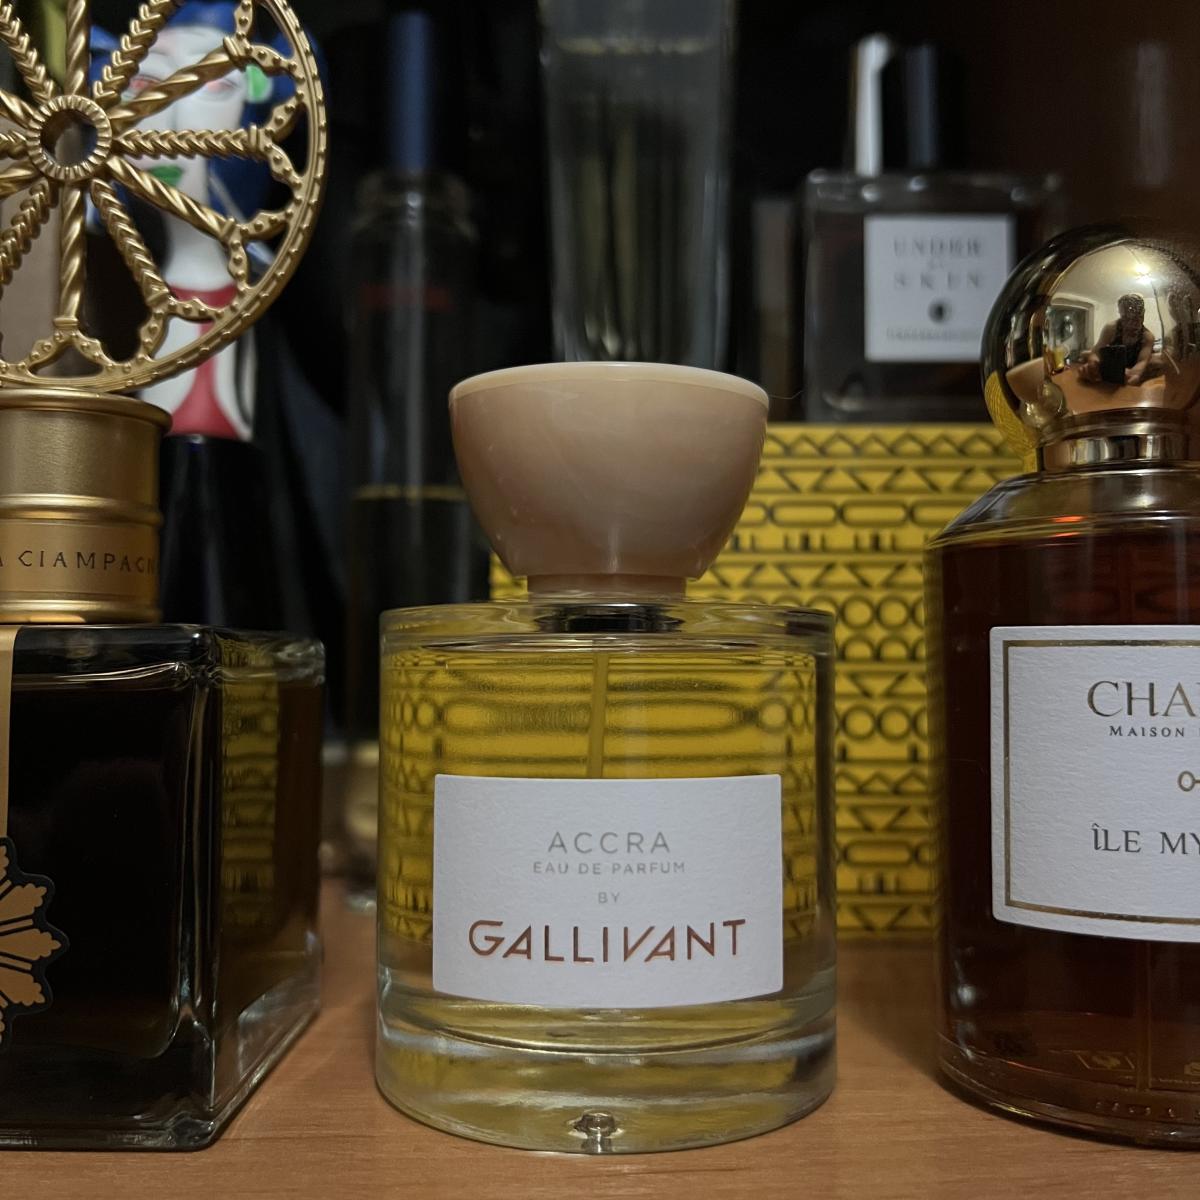 Accra Gallivant perfume - a new fragrance for women and men 2023